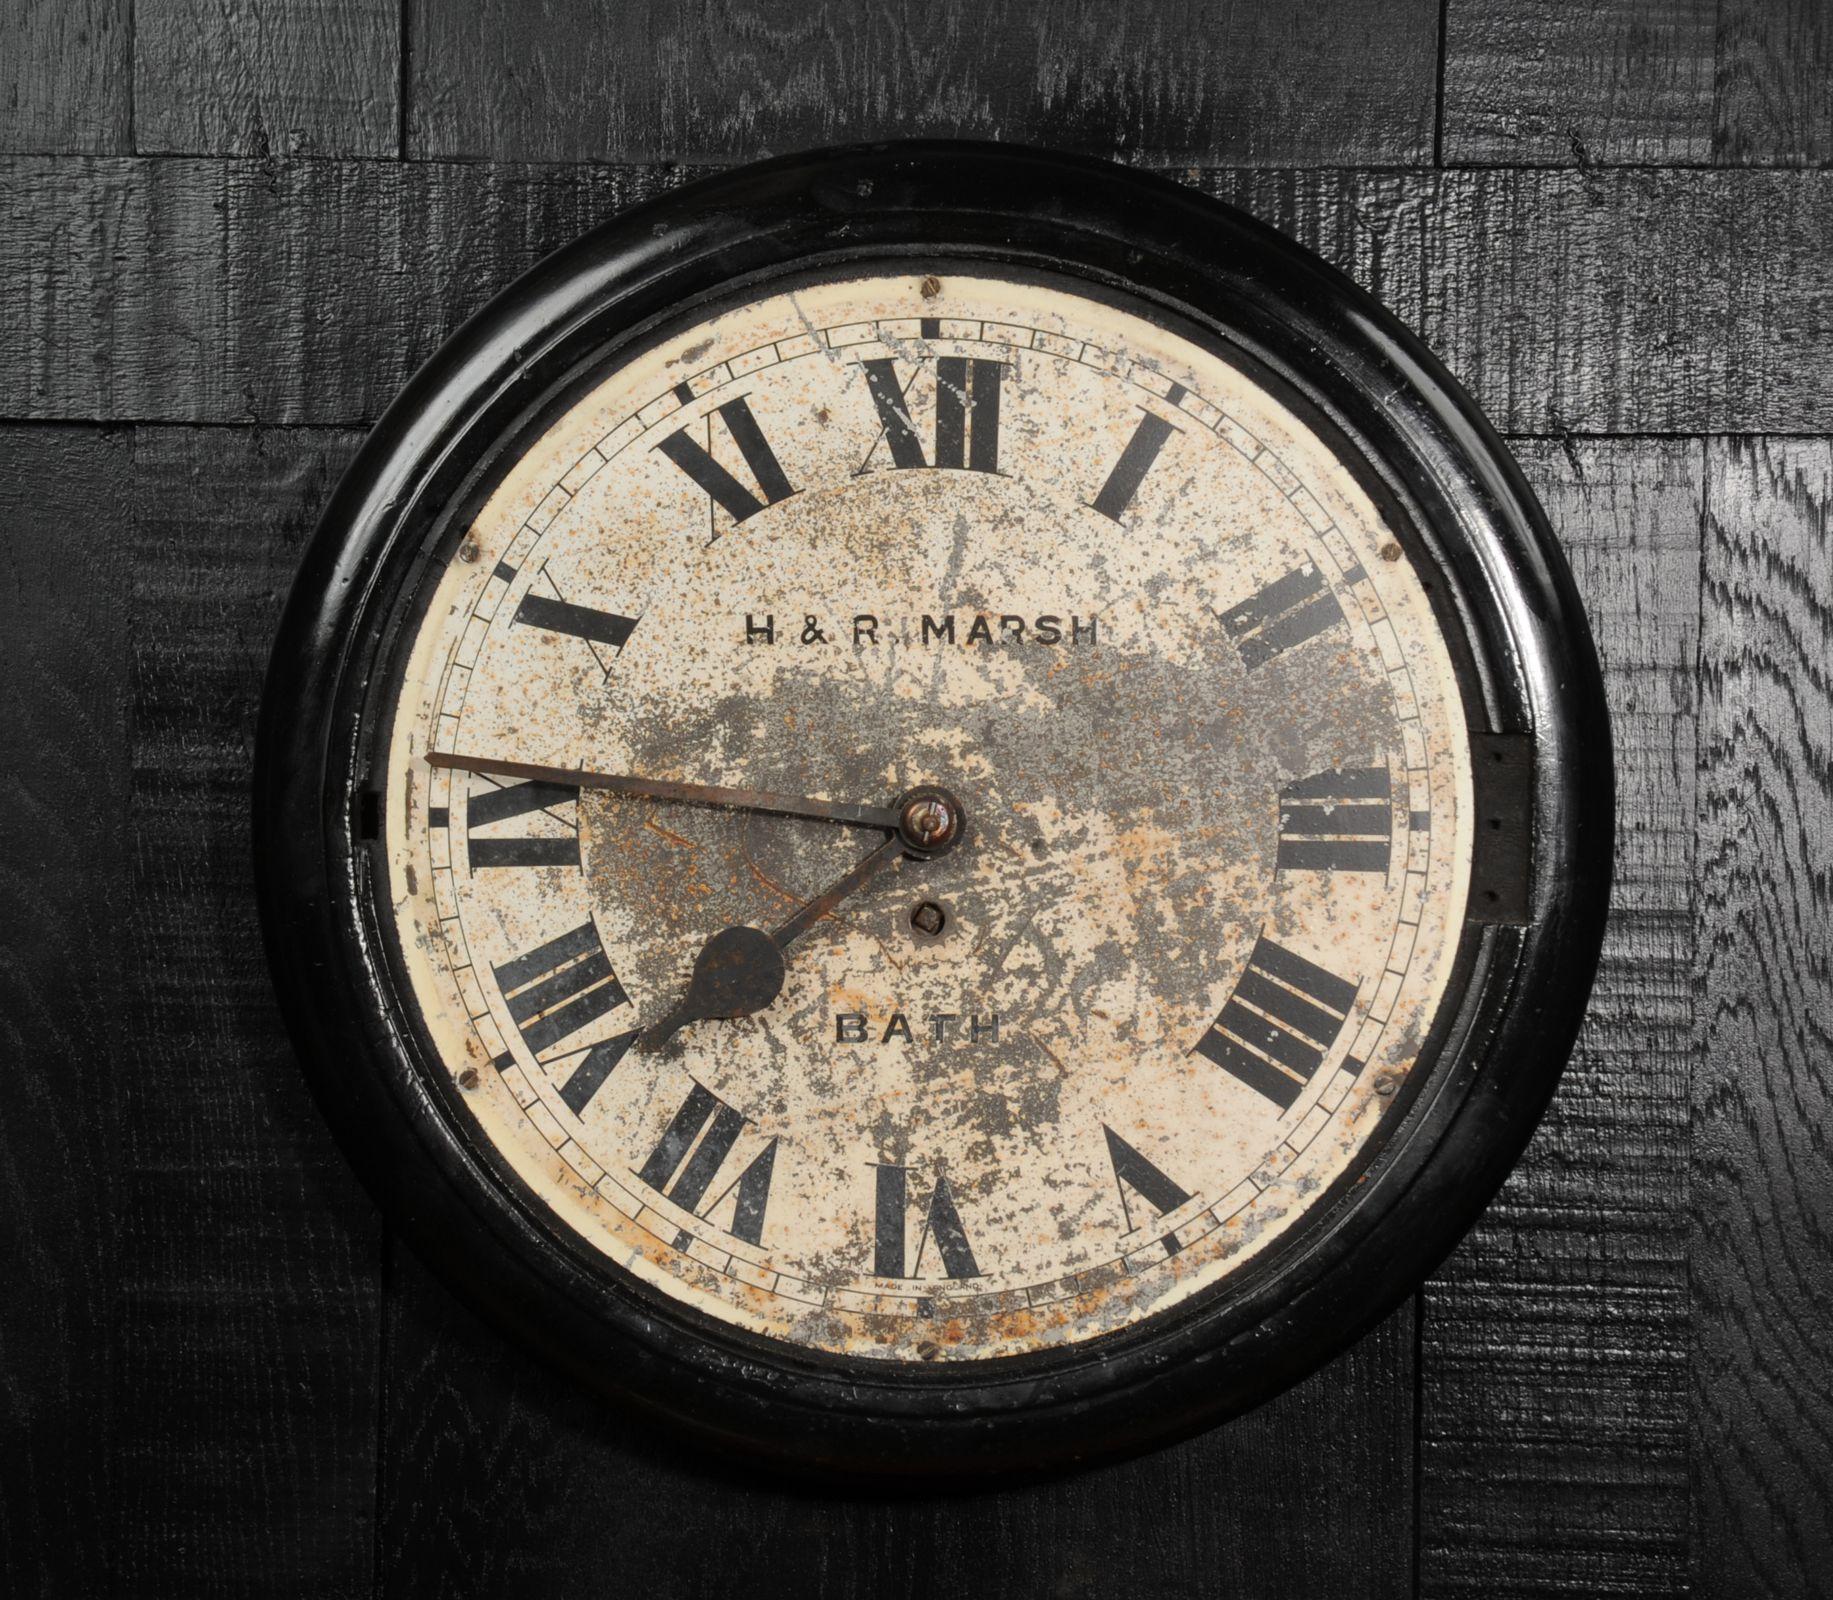 A lovely antique painted iron clock dial signed ''H & R Marsh, Bath'' and dating from circa 1910. As reclaimed by our buyer from a derelict building, it bares the scars of a hard life. Beautifully patinated with paint loss, scratches and rust. It